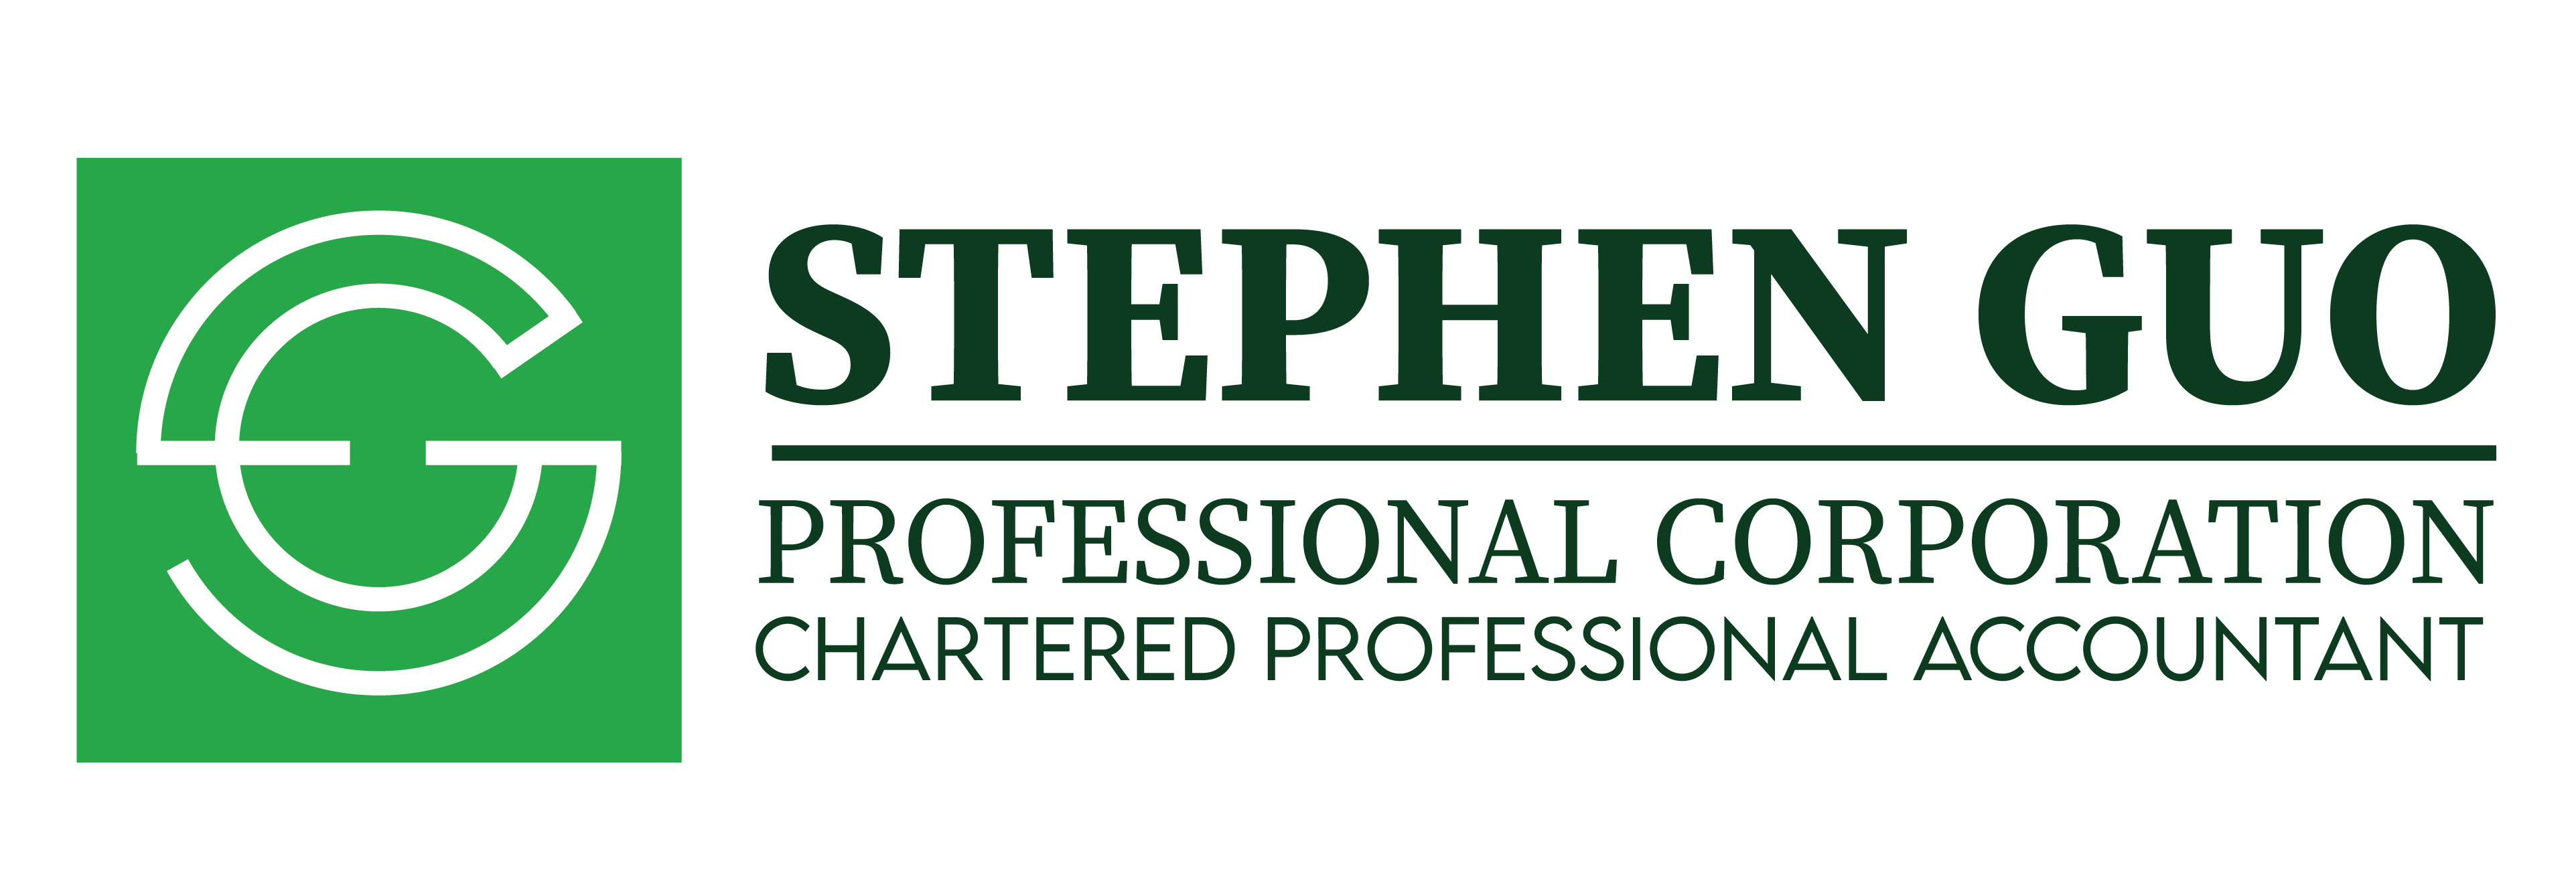 Stephen Guo Chartered Professional Accountant